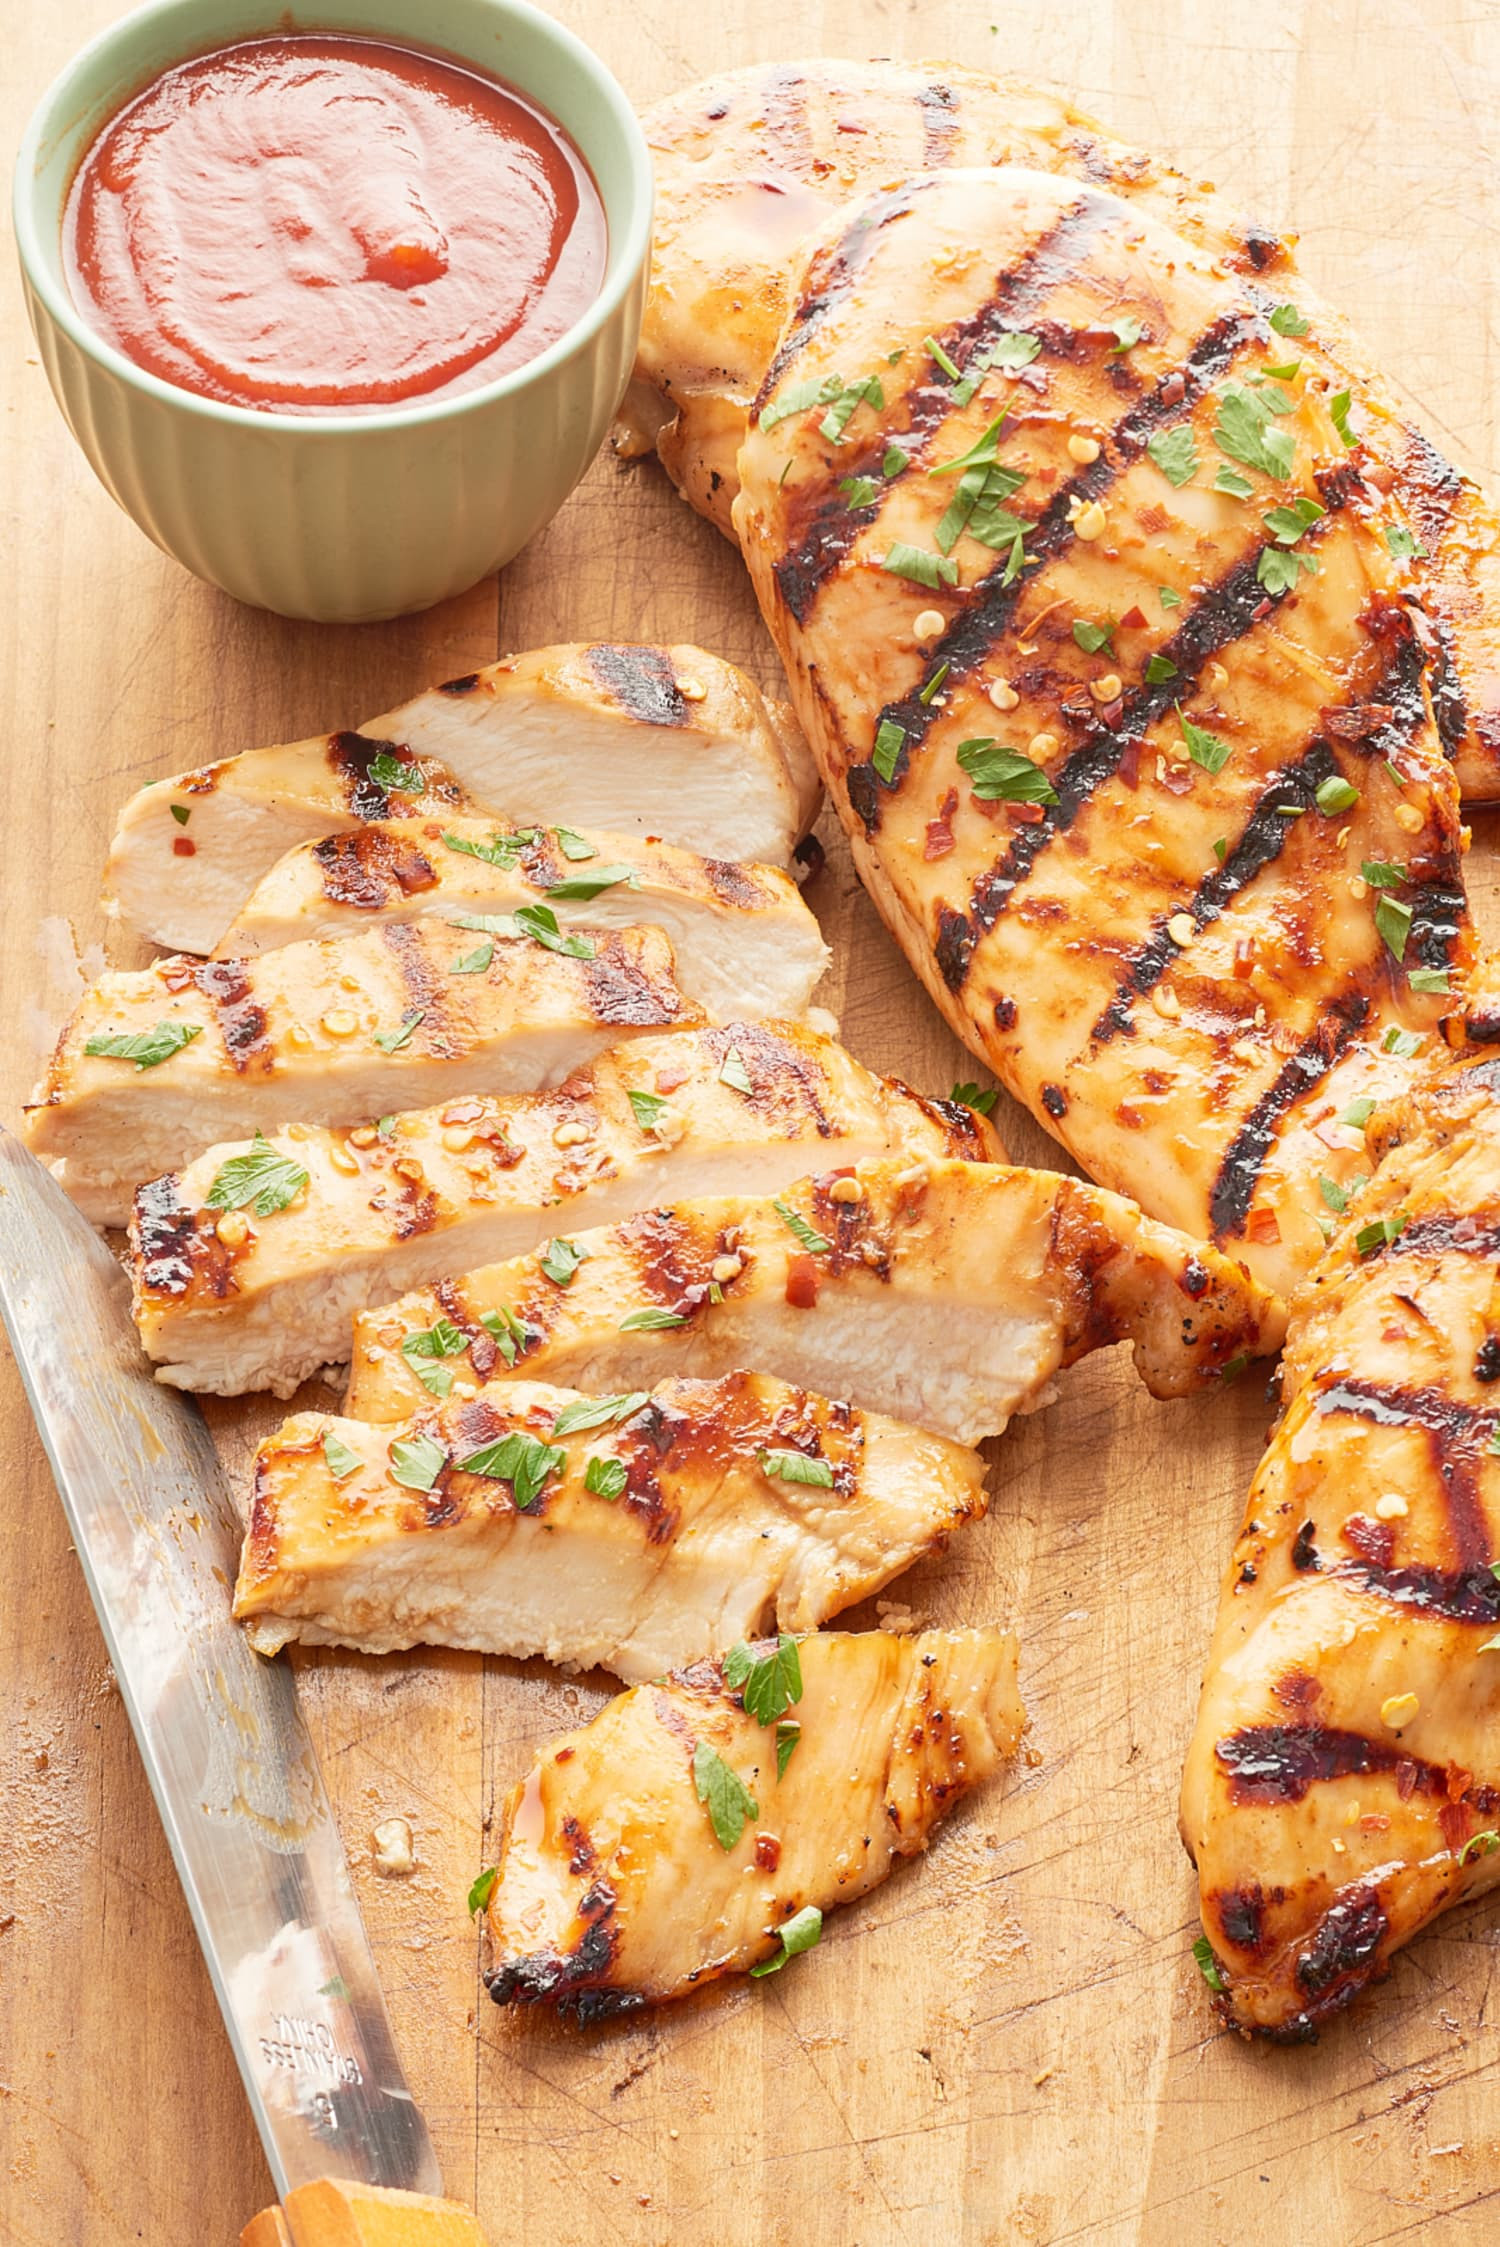 Chicken Breasts Grill
 How To Make Juicy Flavorful Grilled Chicken Breast